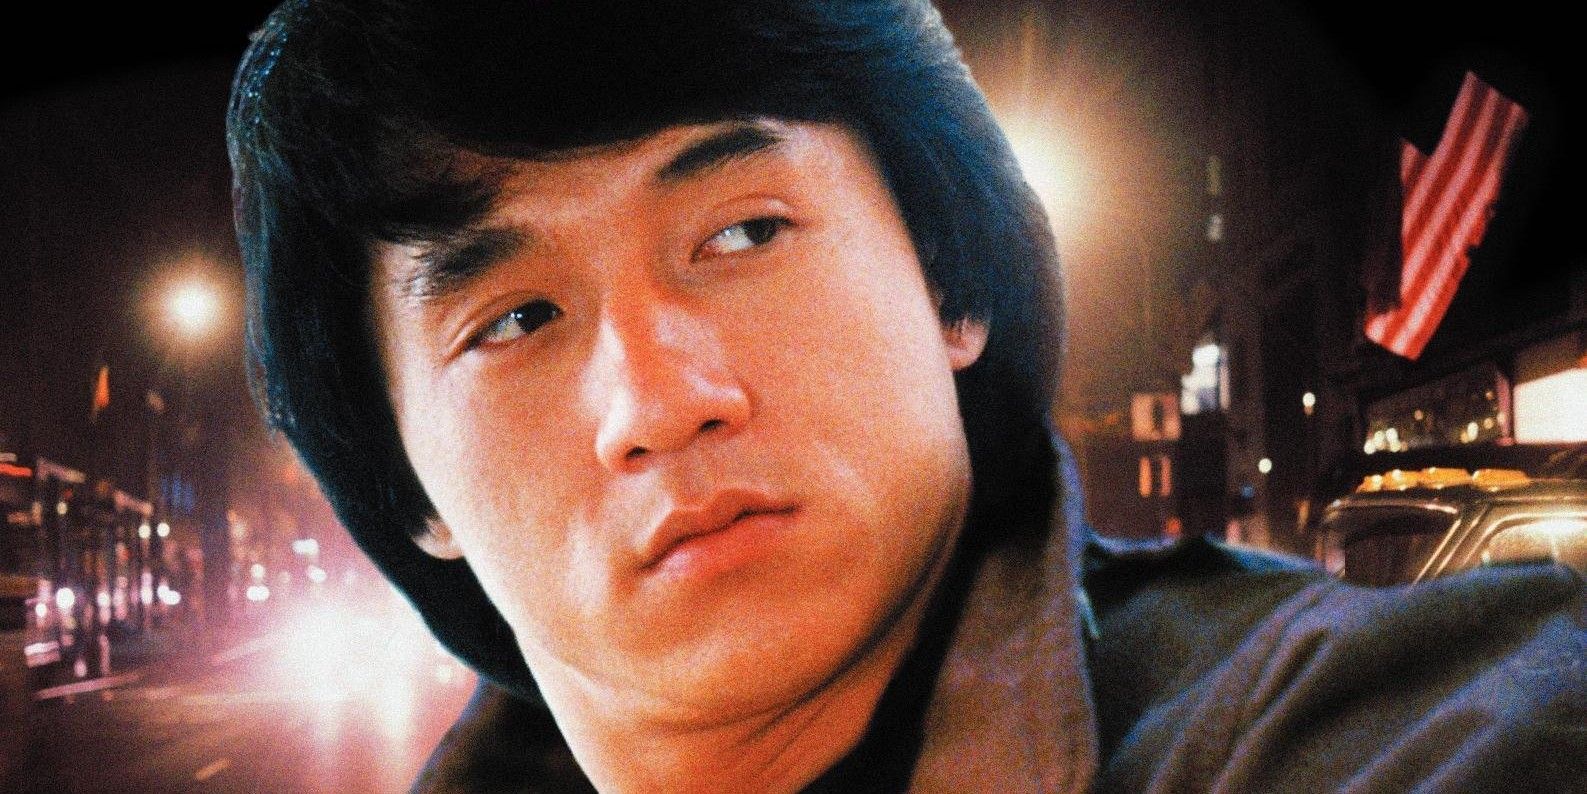 Jackie Chan's Billy Wong against a street at night in The Protector poster.